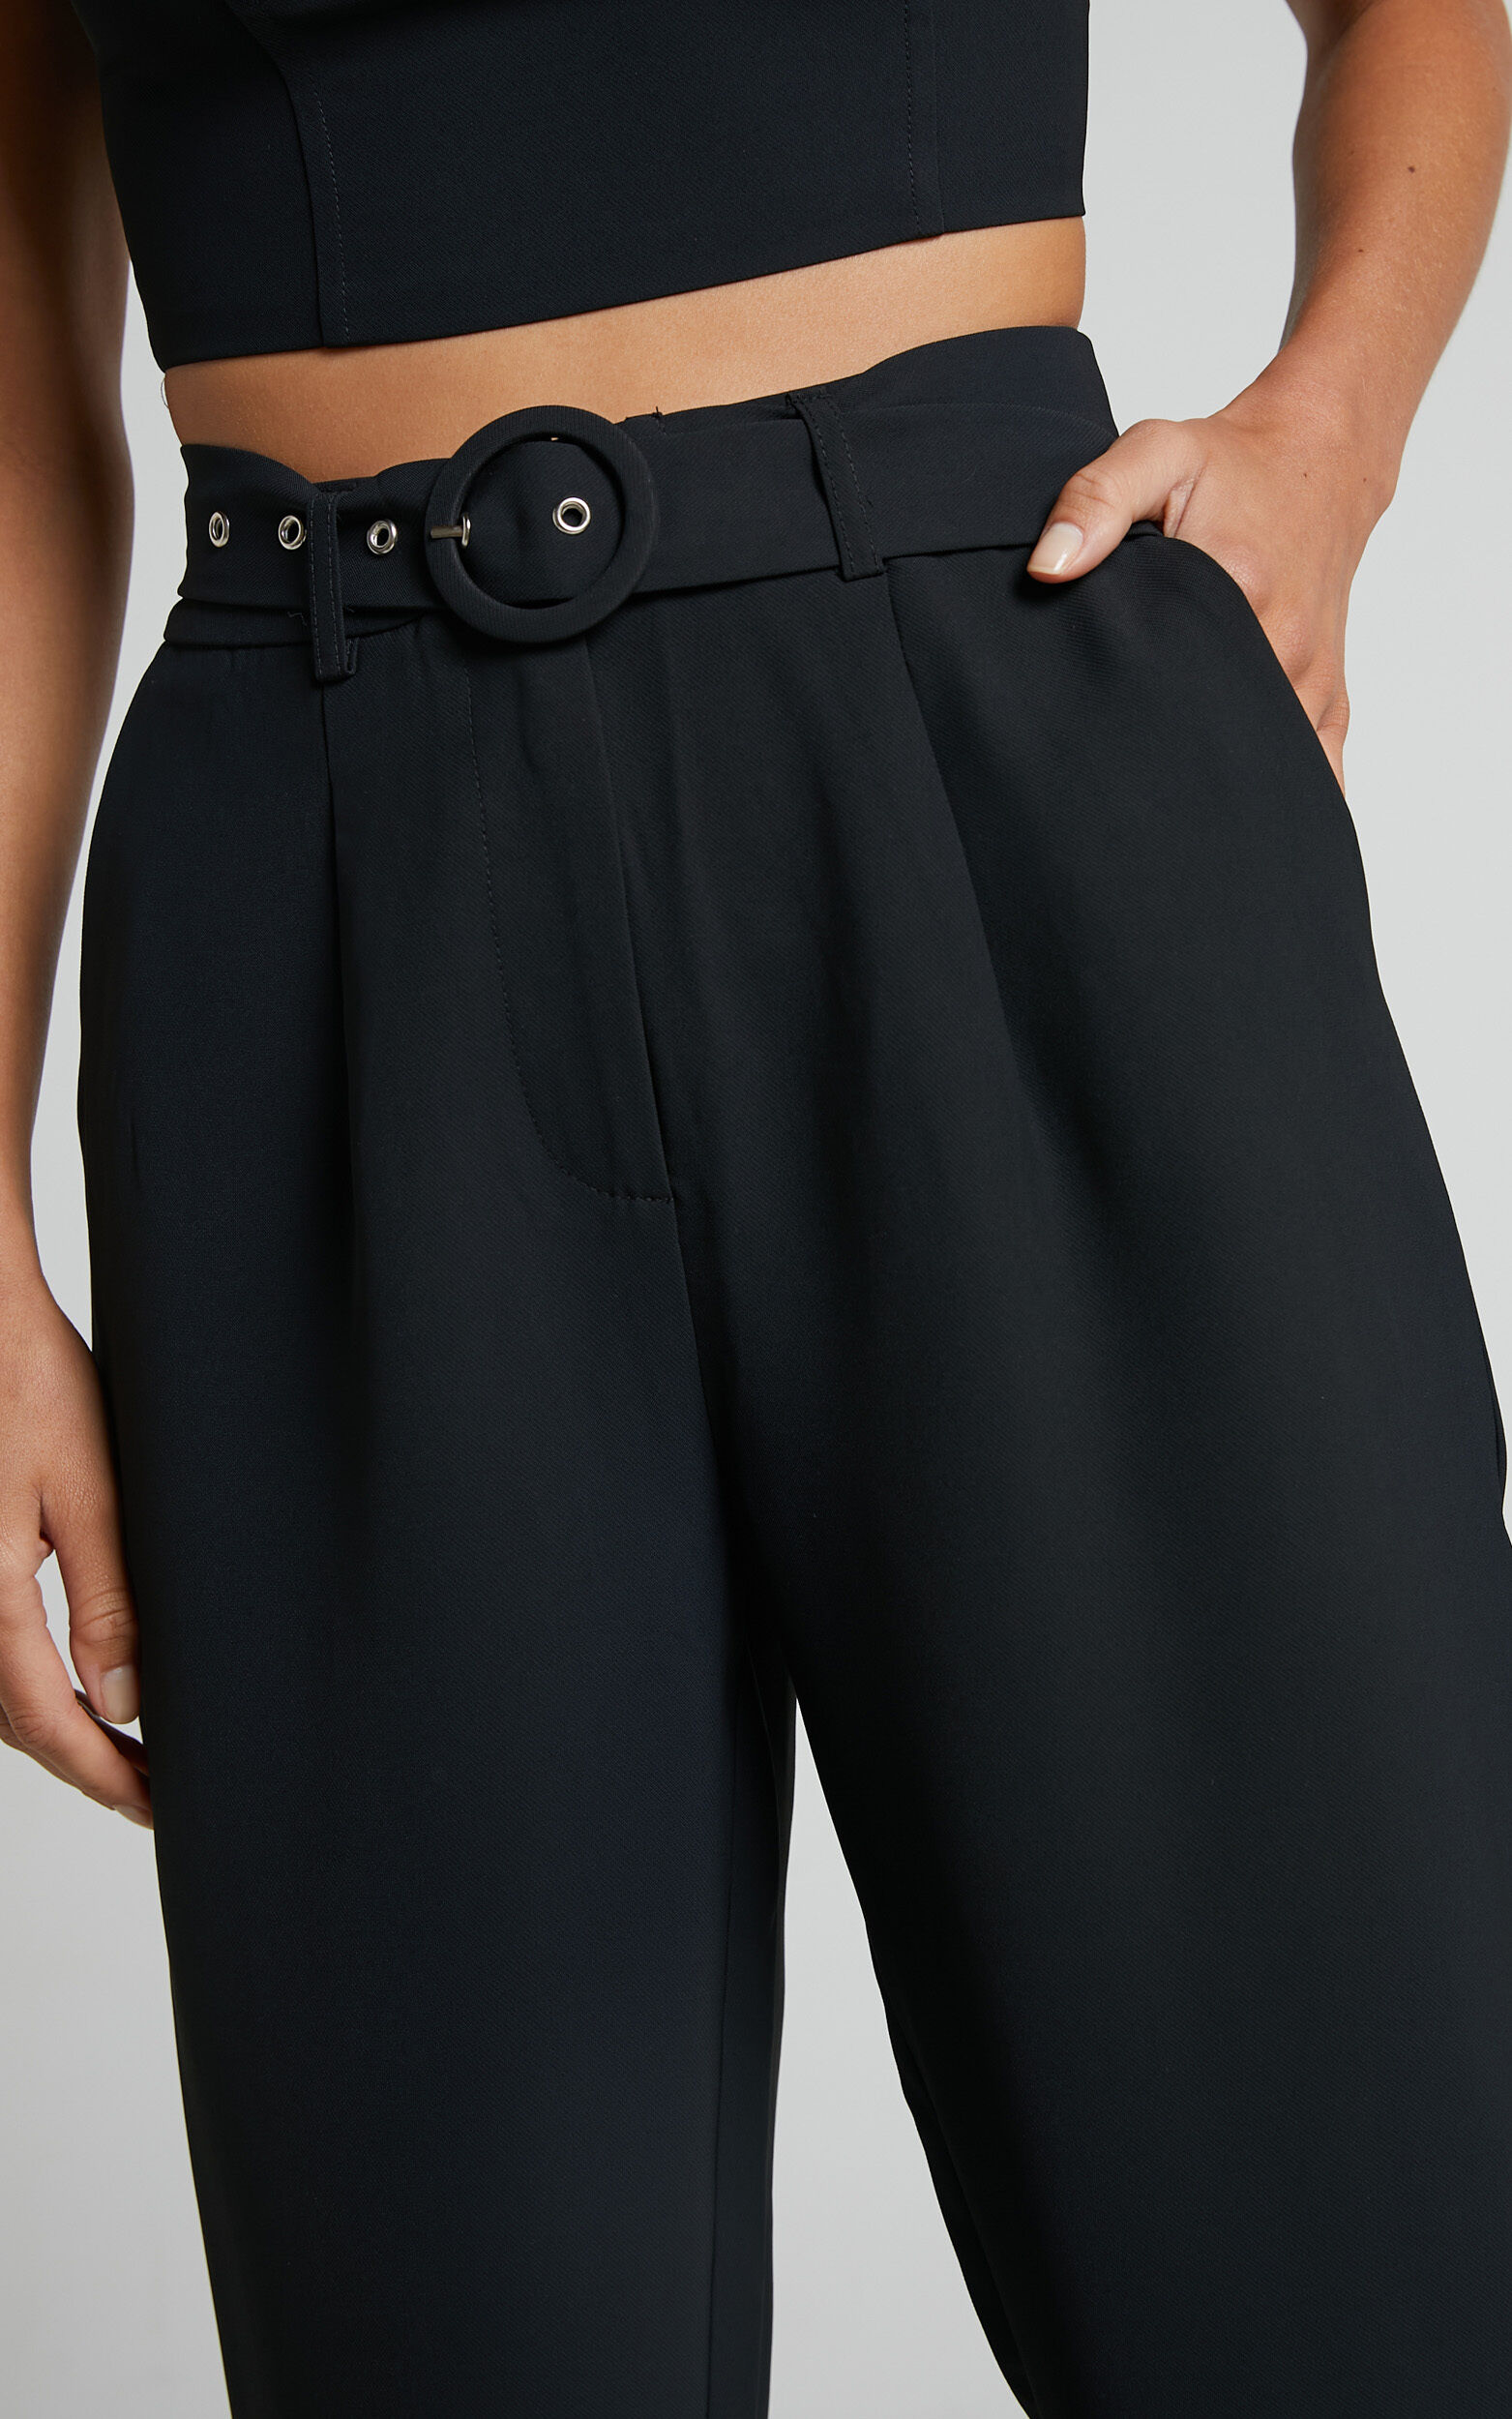 Reyna Two Piece Set Crop Top And Tailored Pants In Black Showpo